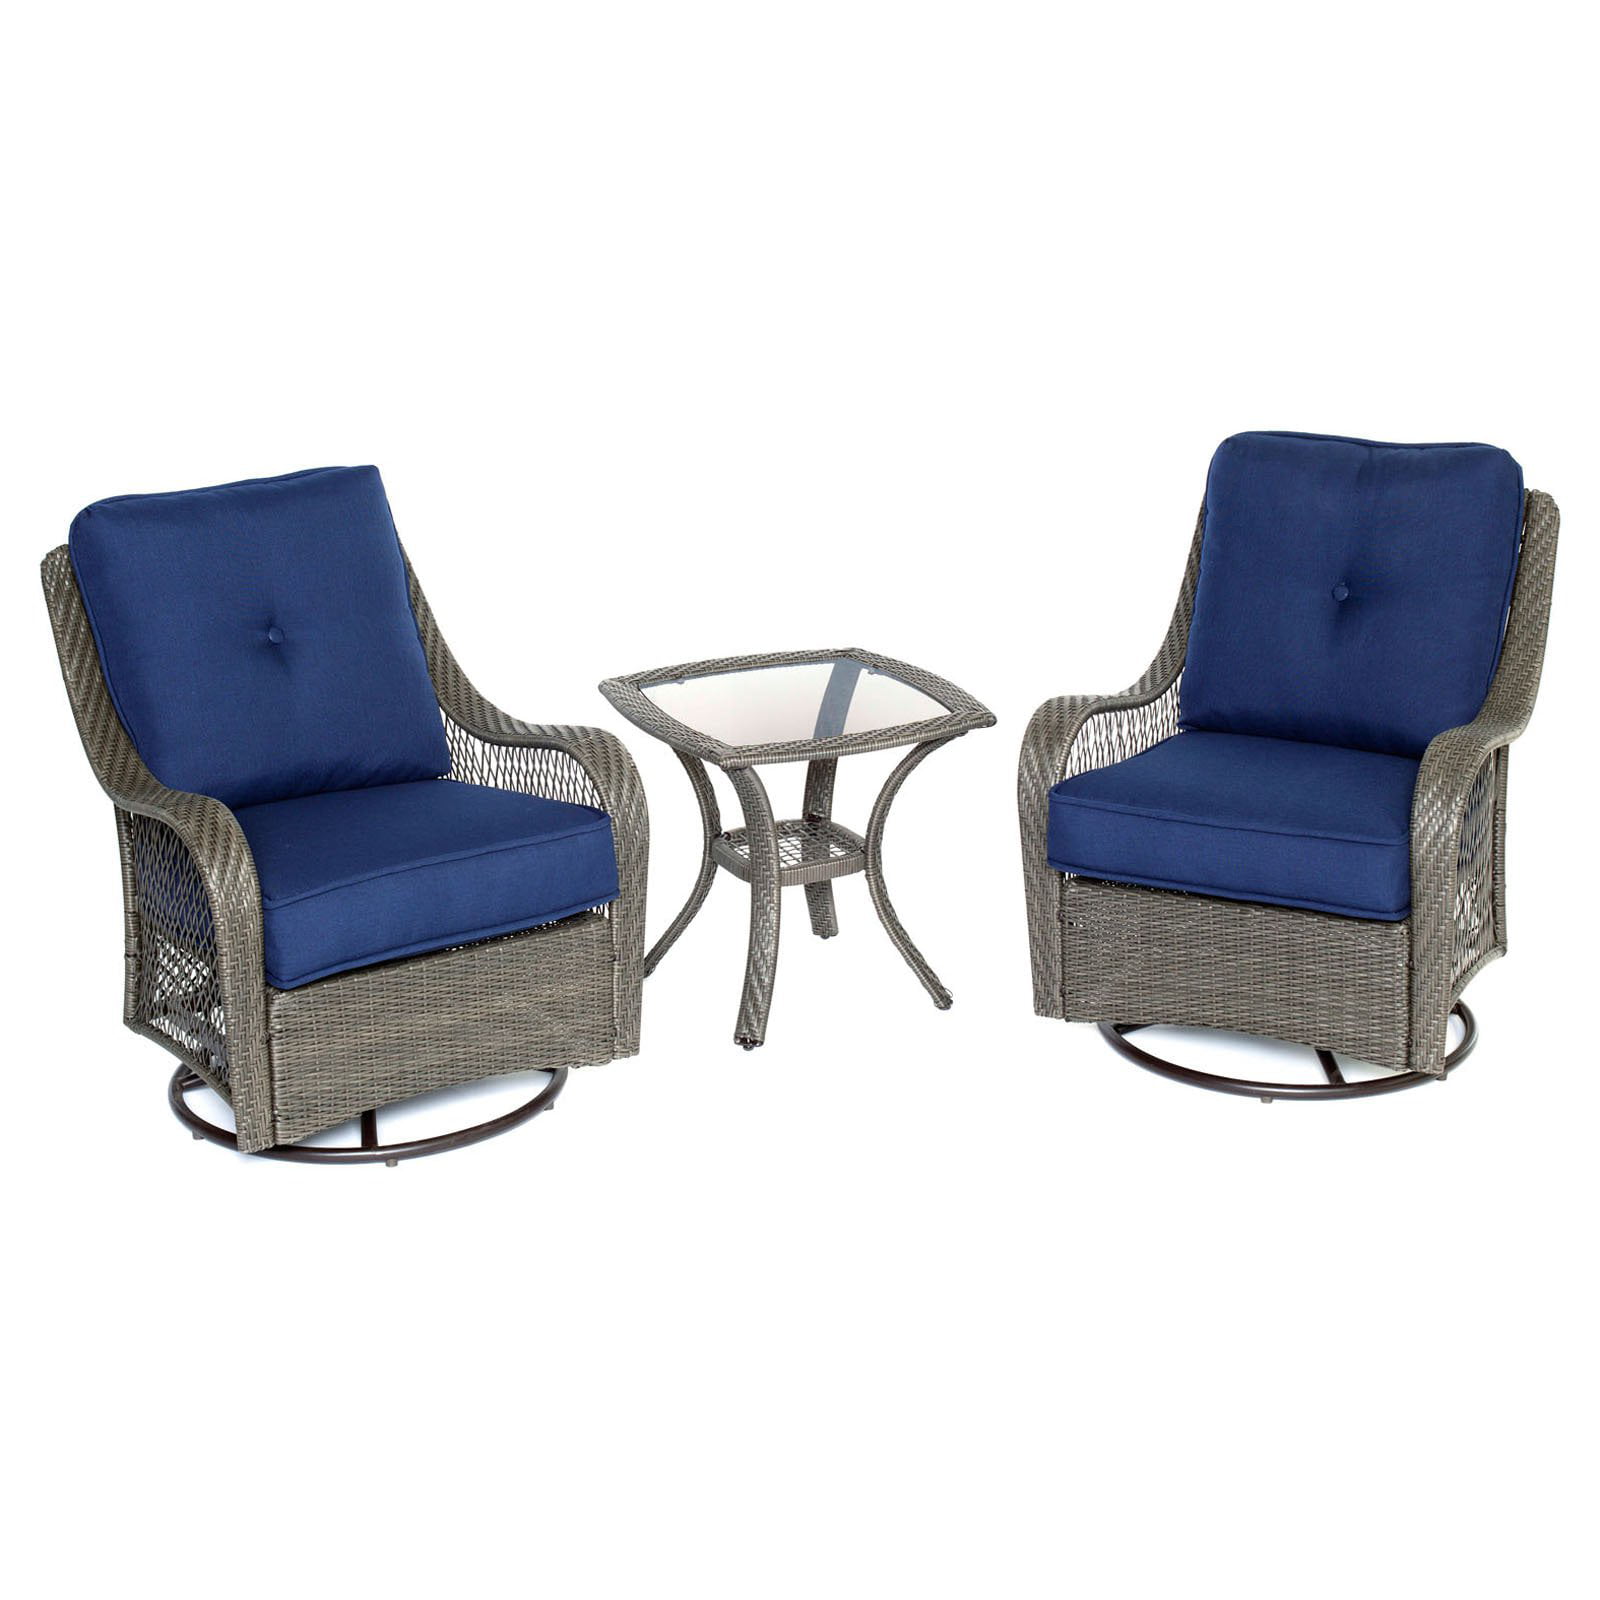 Hanover Orleans 3-Piece Swivel Gliding Chat Set in Heather Gray with Gray Weave 